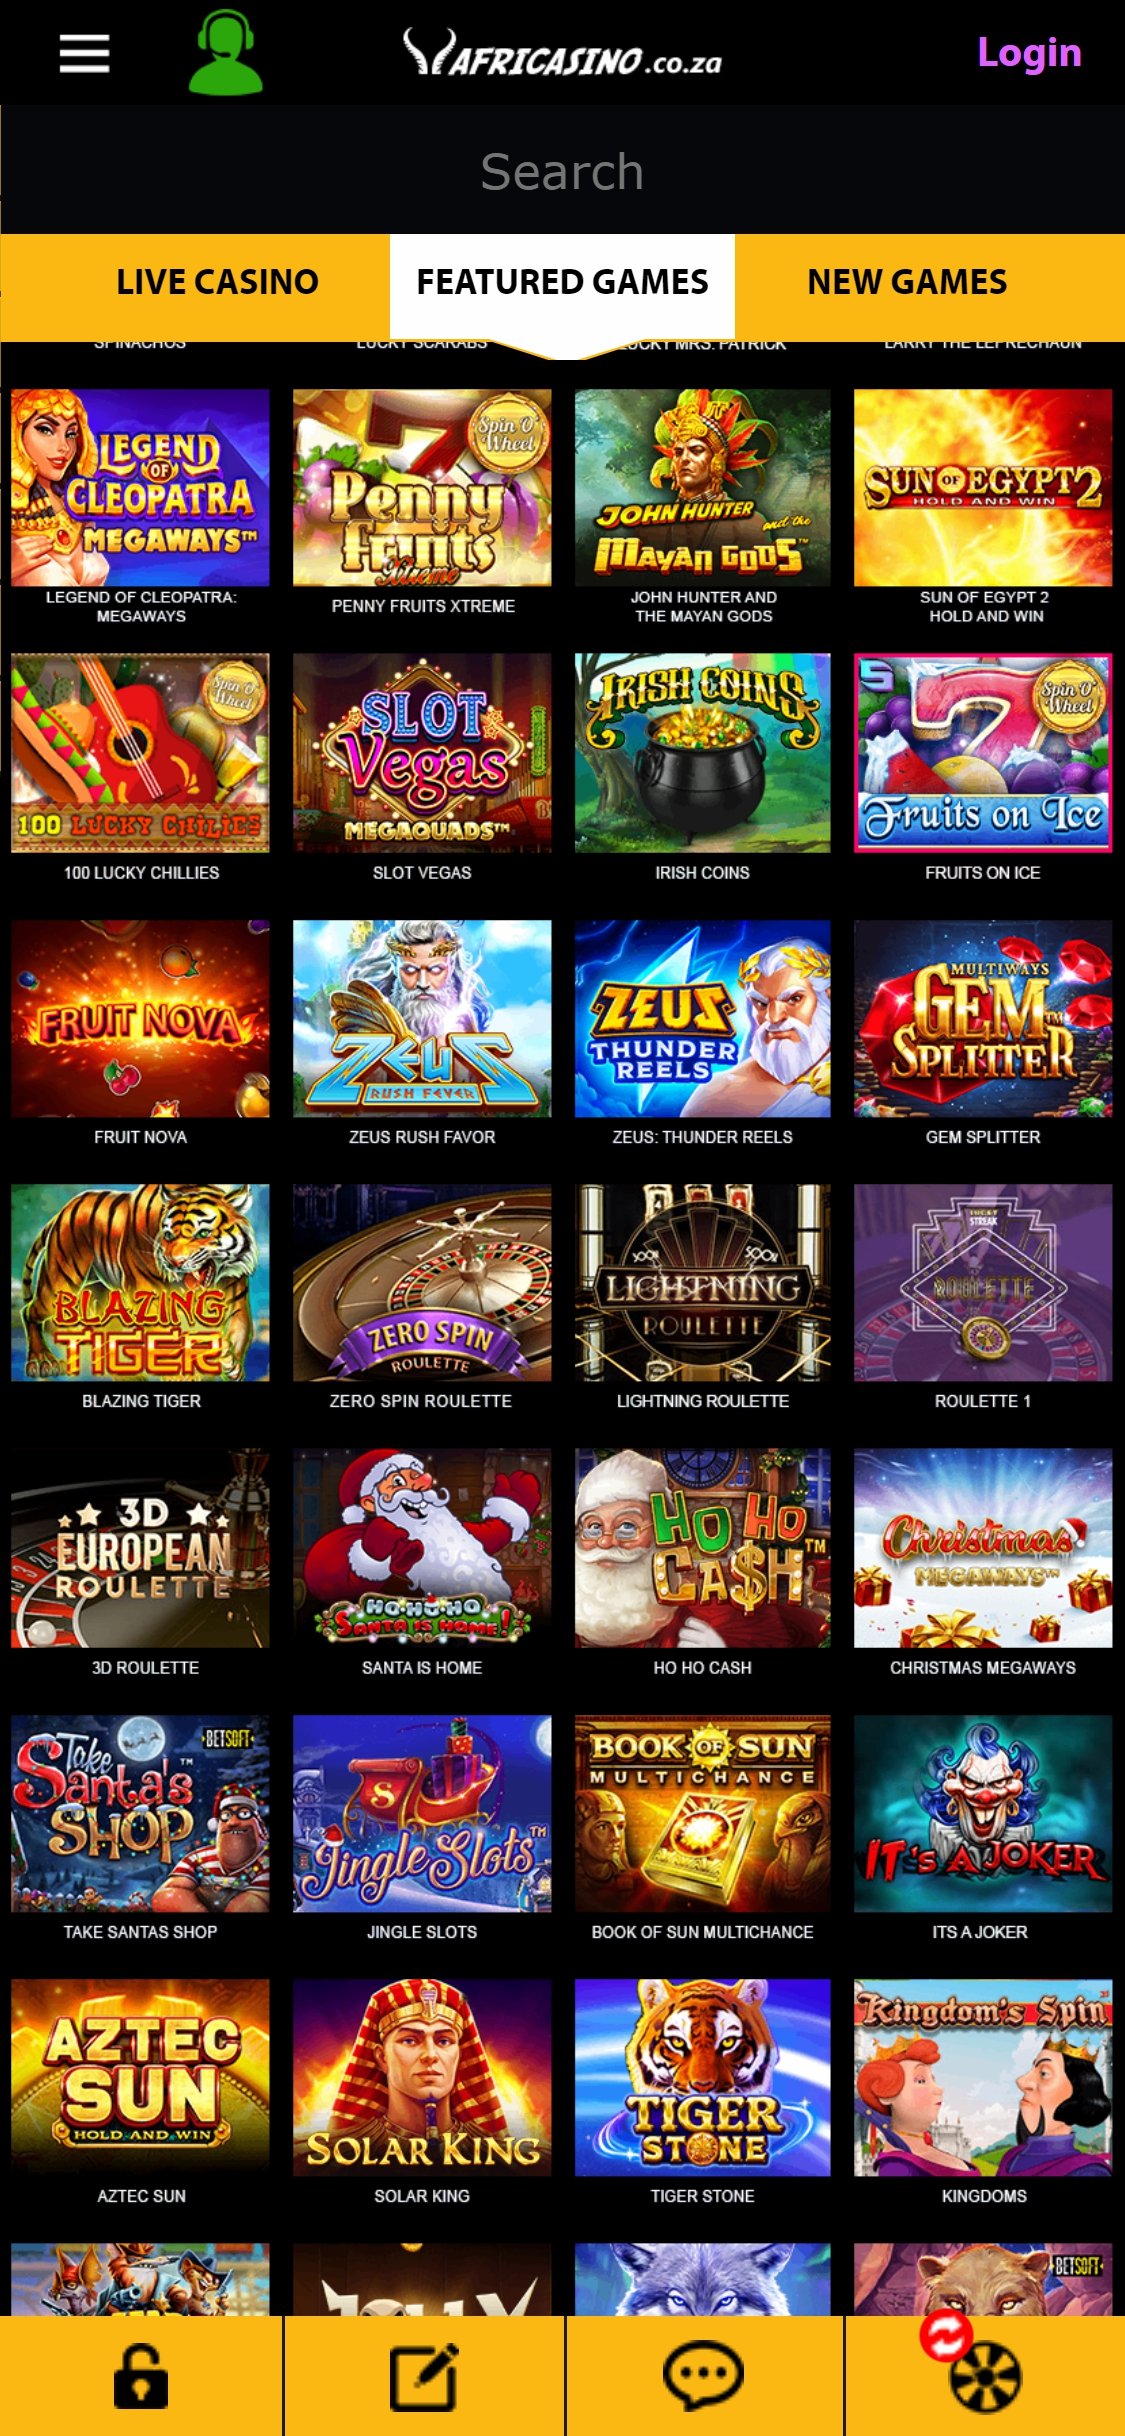 Africasino Mobile Games Review